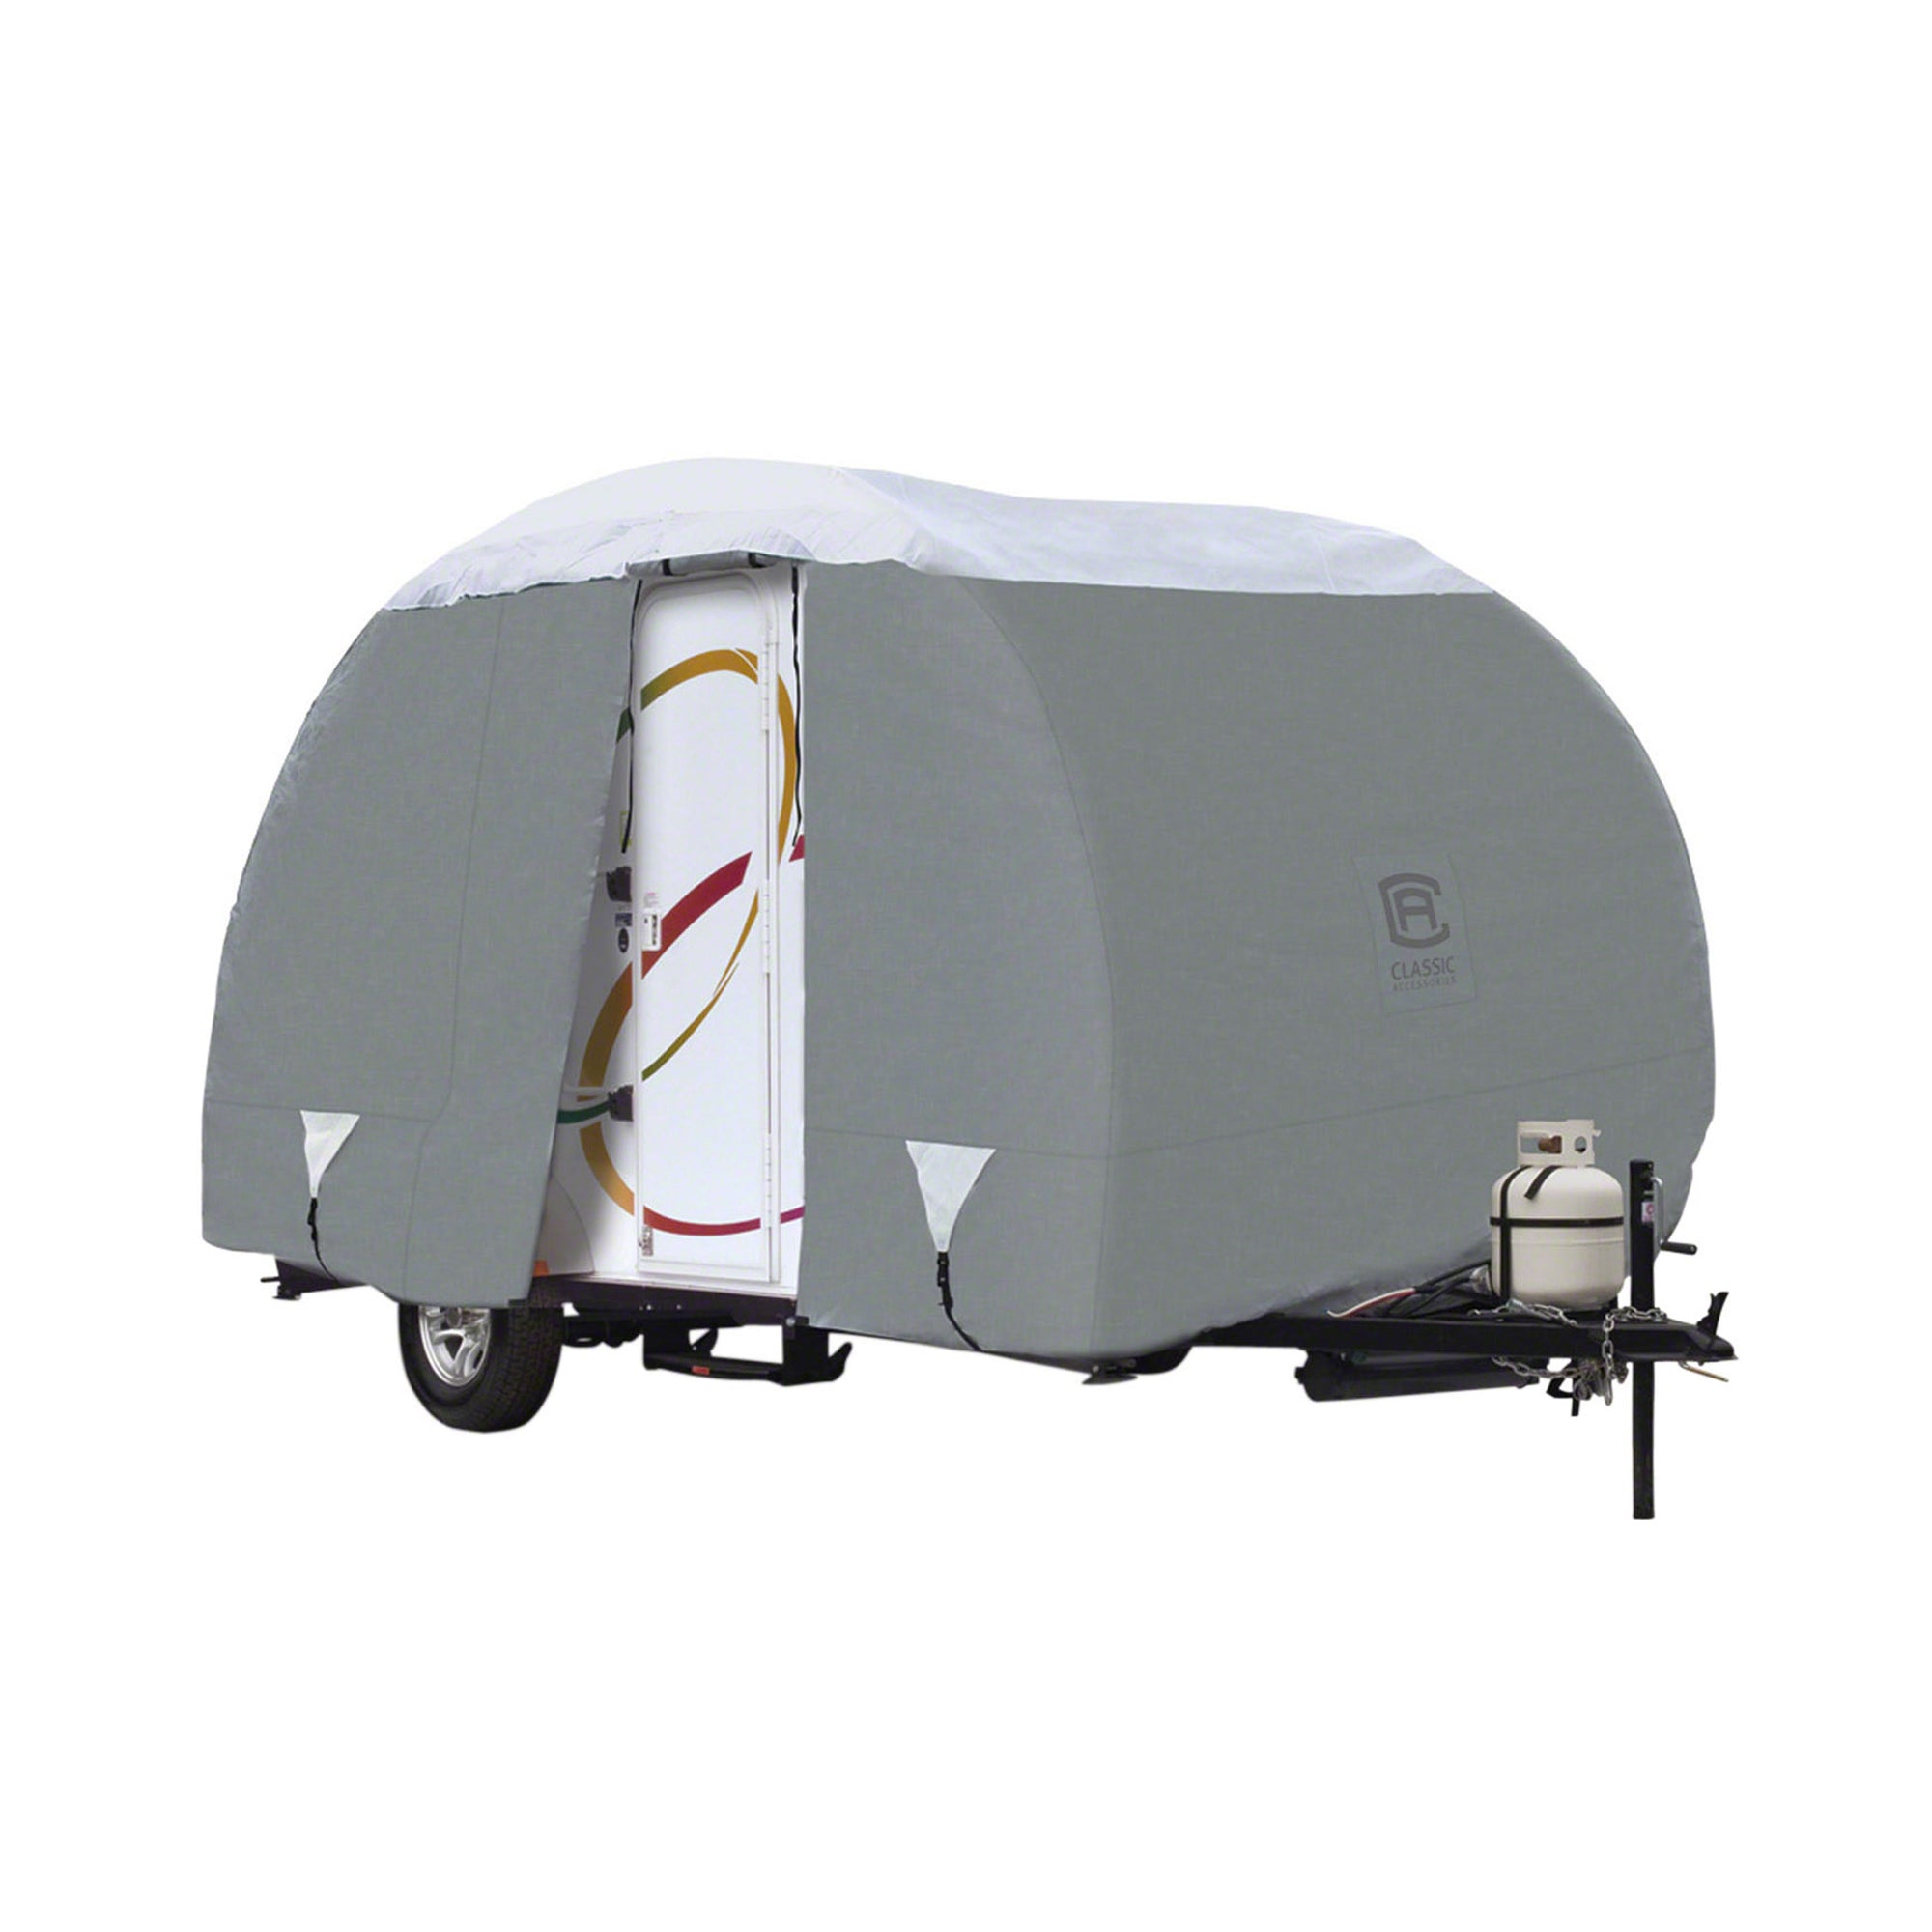 Classic Accessories 80-198-141001-00 PolyPRO 3 R-Pod Trailer Cover - Up to 16' 6"